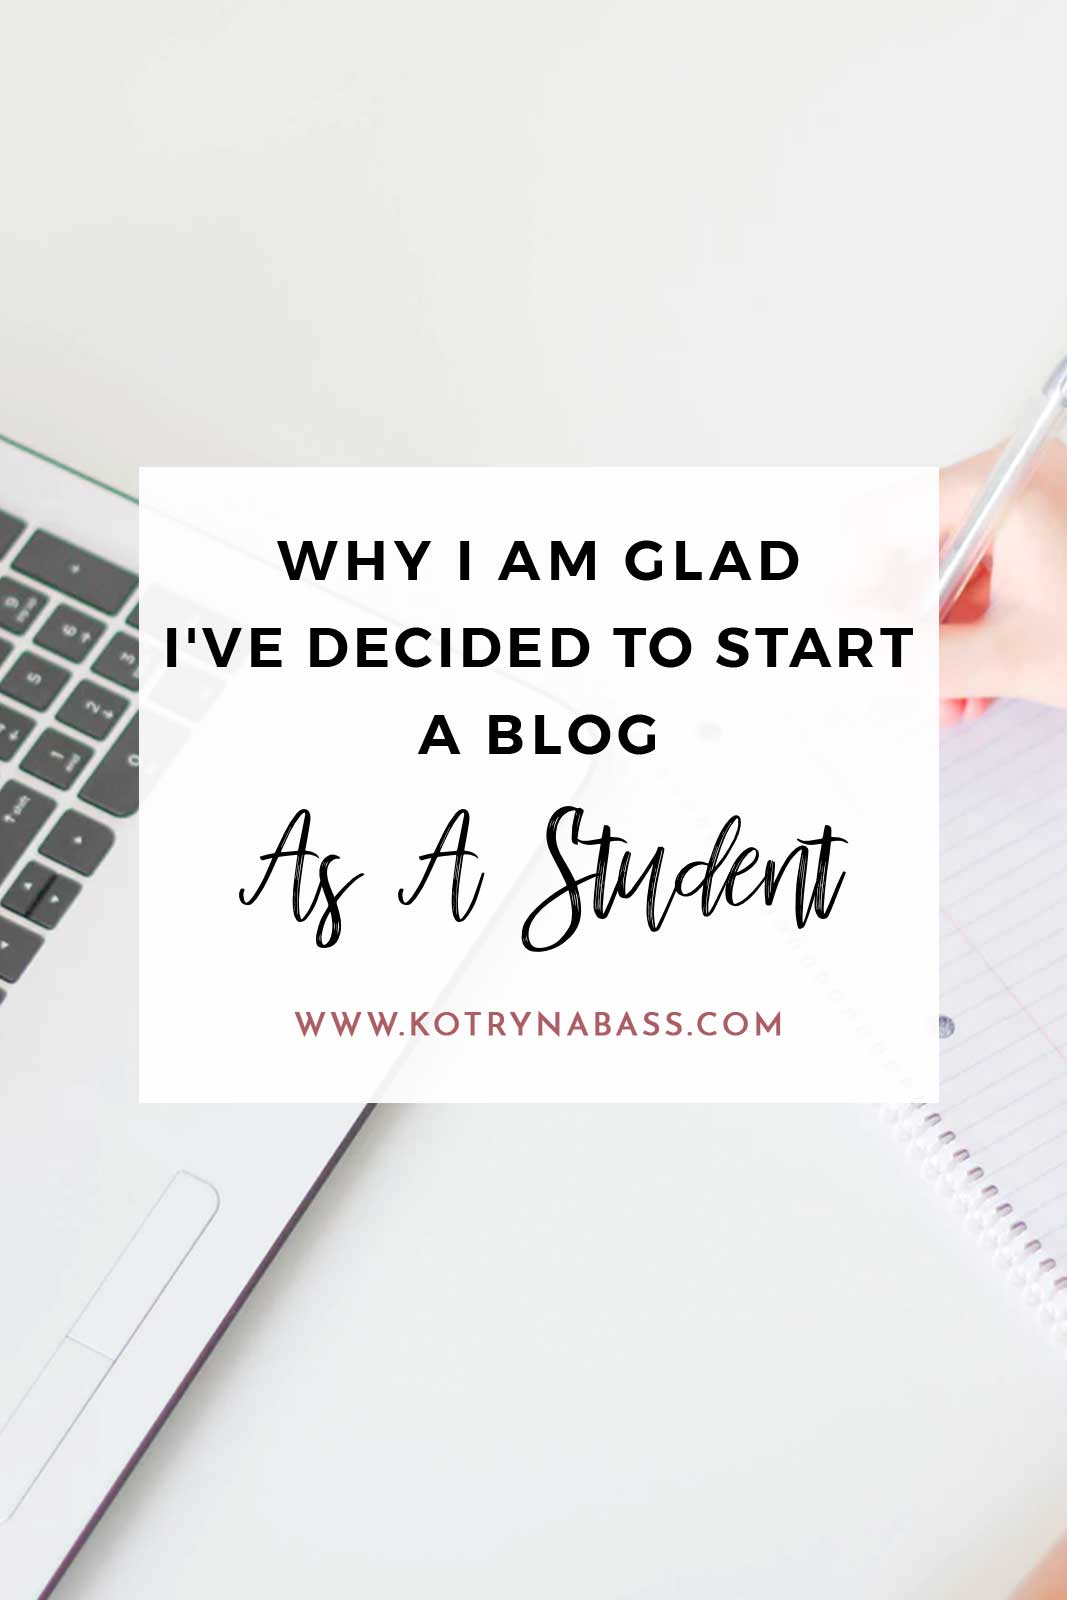 I've started this blog of mine while in my second year of university and I feel so lucky I've made this decision. If you're currently thinking to start a blog as a student. Not only you'll be able to share your new knowledge with the others, you might even end up making some money on the side!